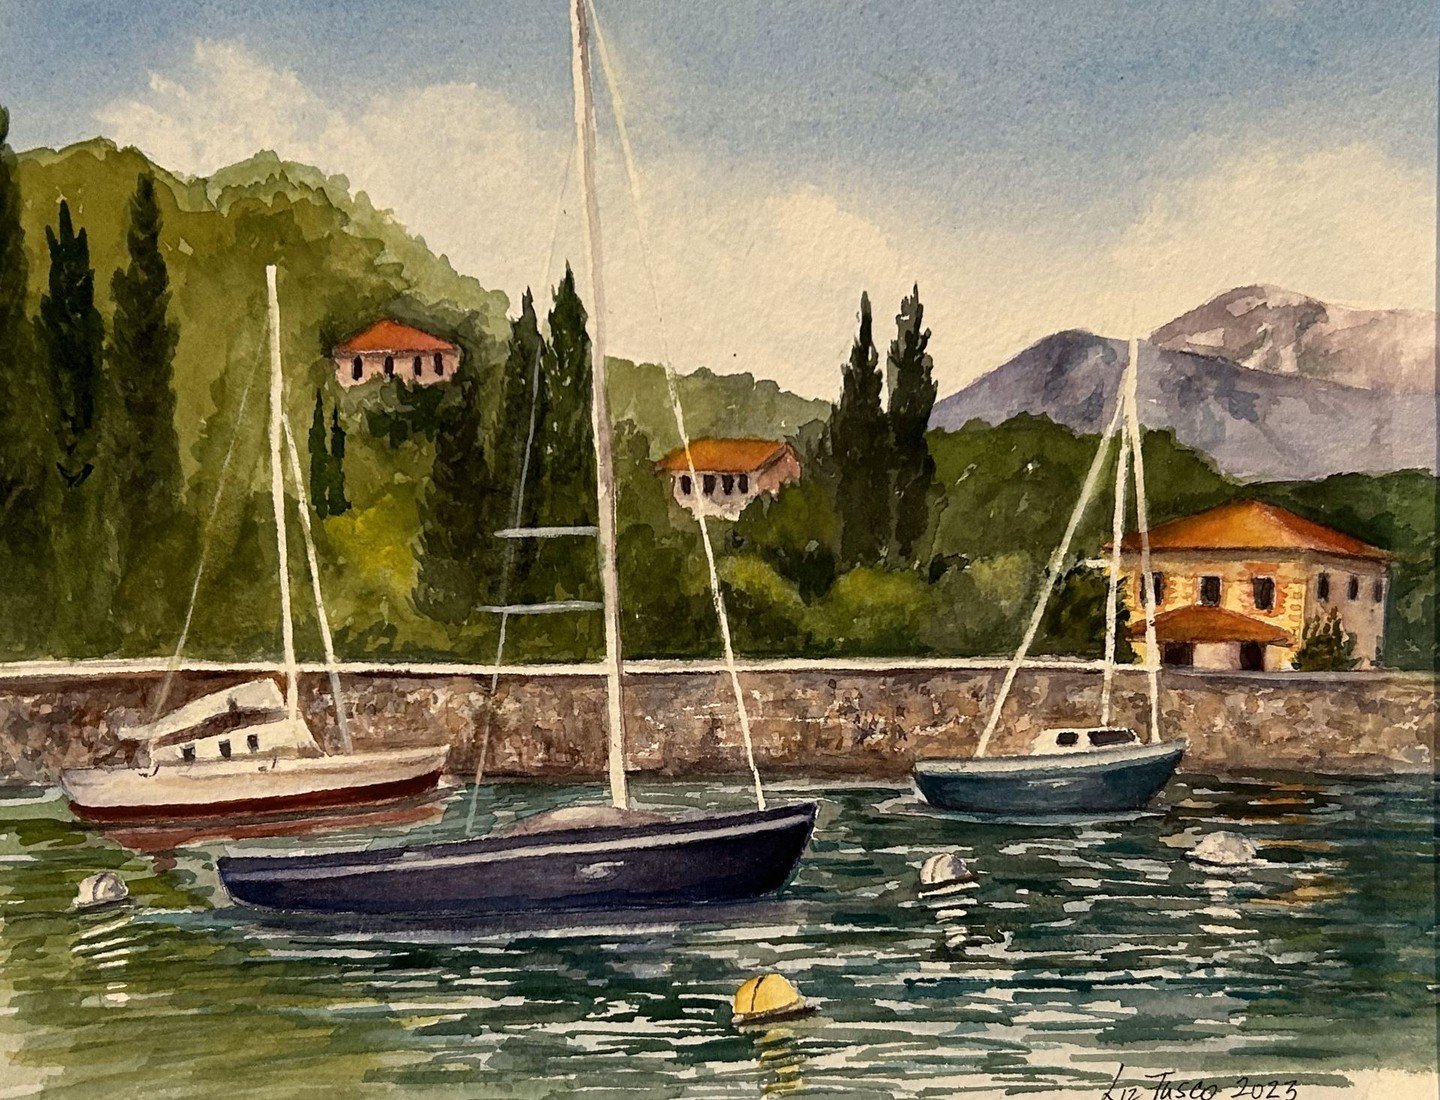 &quot;Borgo di Pescallo&quot;, by Elizabeth Fusco. 2023.
🌟 Elizabeth teaches Watercolor to students of all levels
🥖This year, she's running a plein air workshop in France. (SOLD OUT)
🍷Get ready for her art retreat to Crete in 2025!!!
SIGN UP on ou